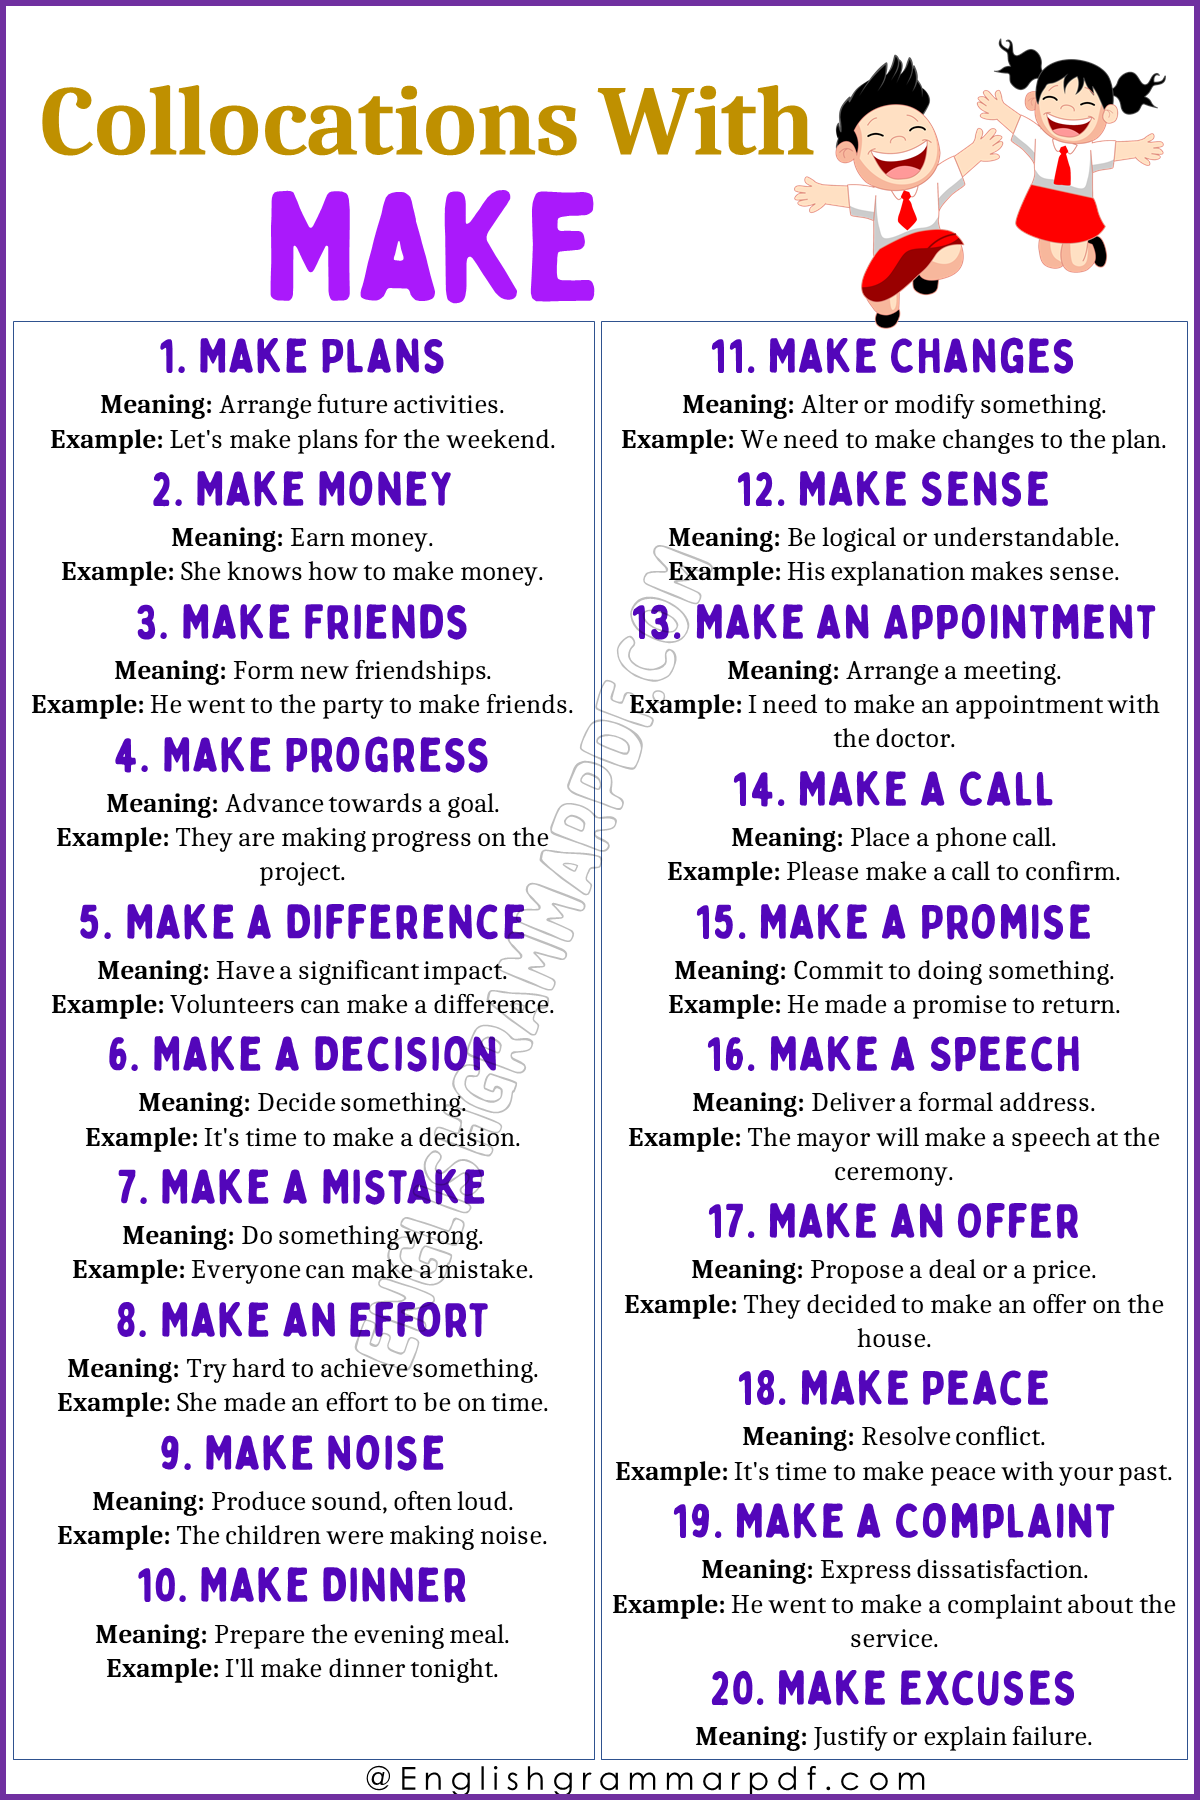 Collocations with Make